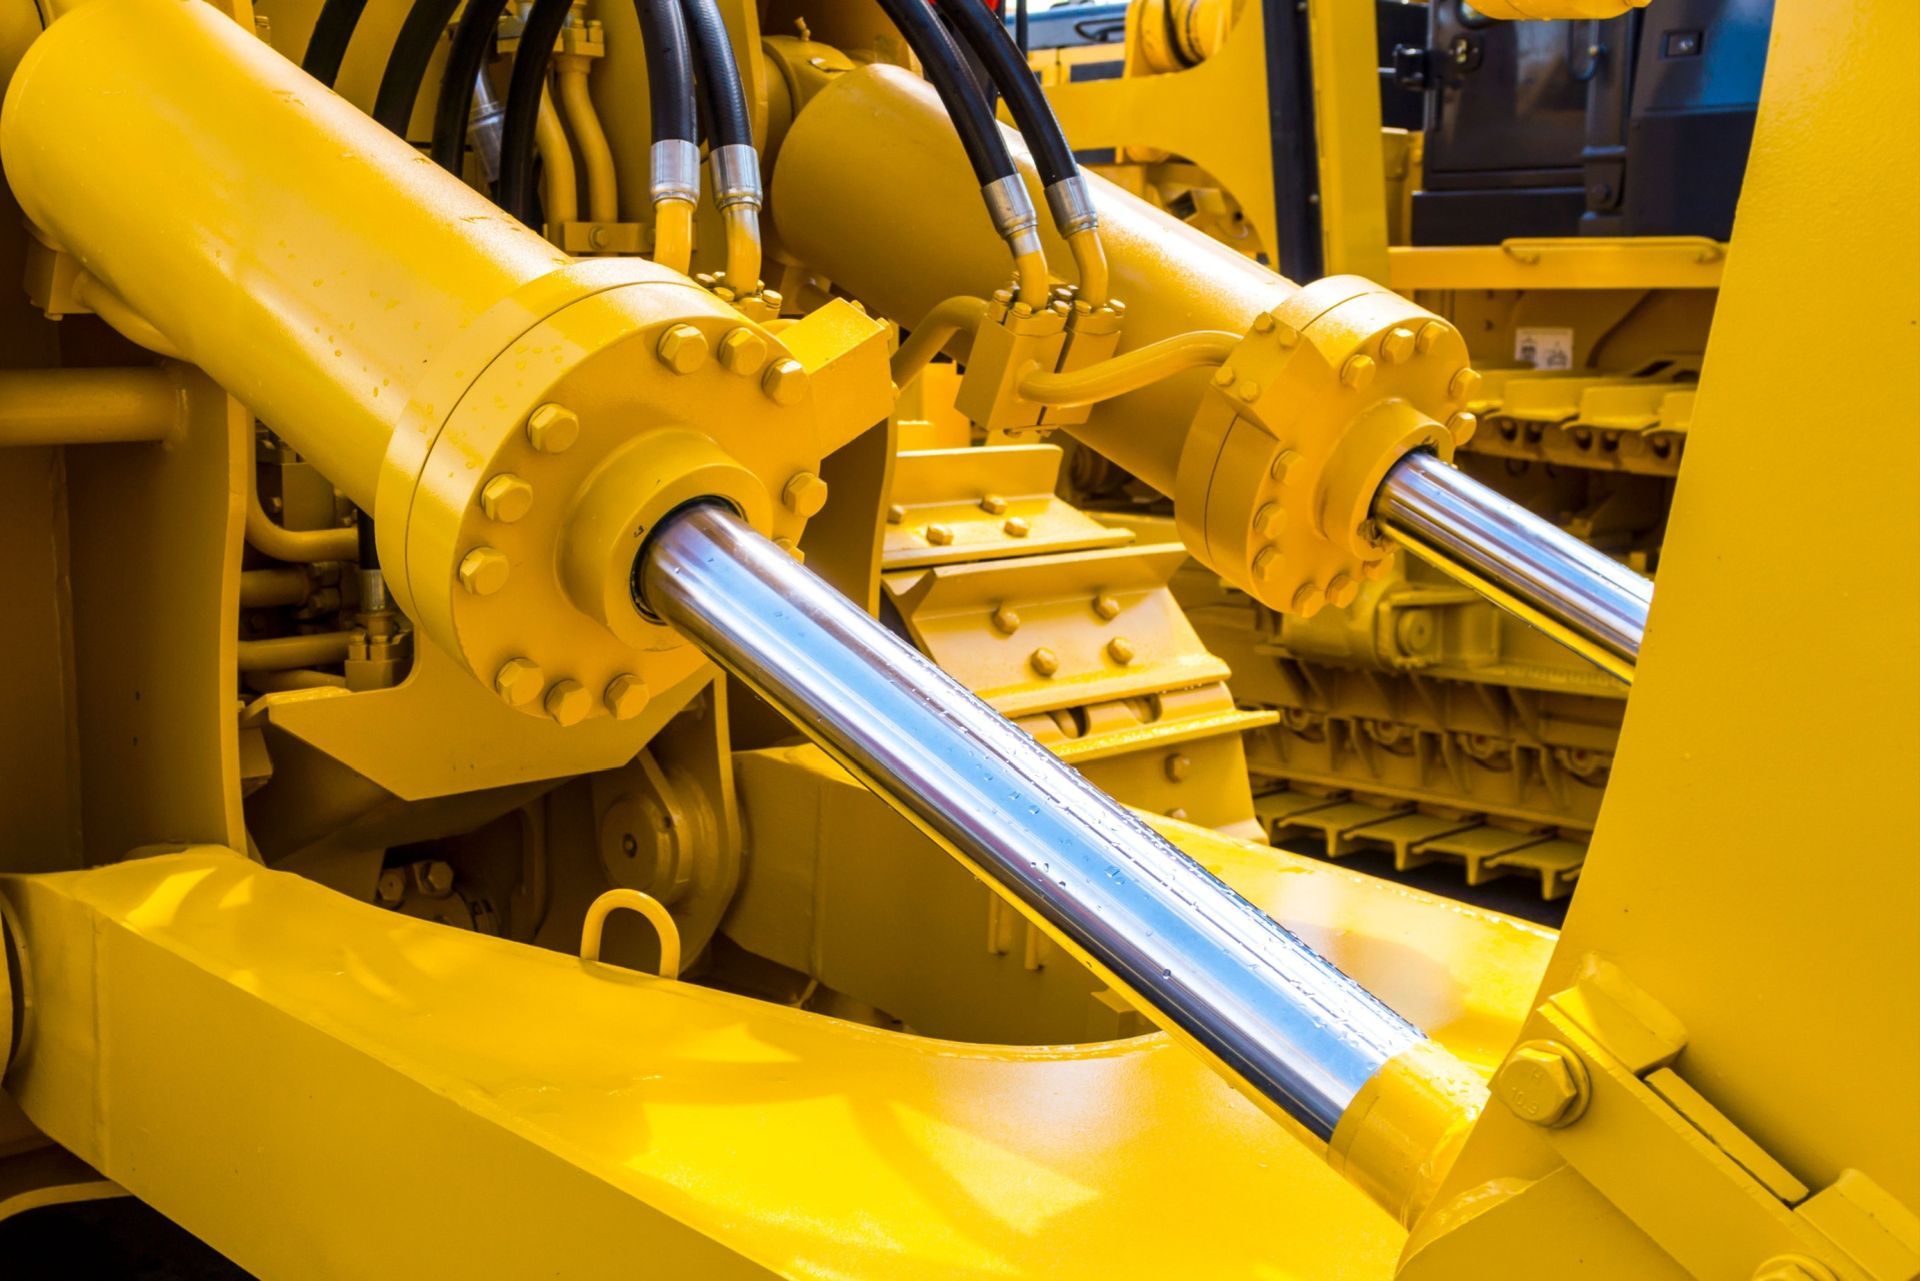 A close up of a yellow hydraulic cylinder on a bulldozer.